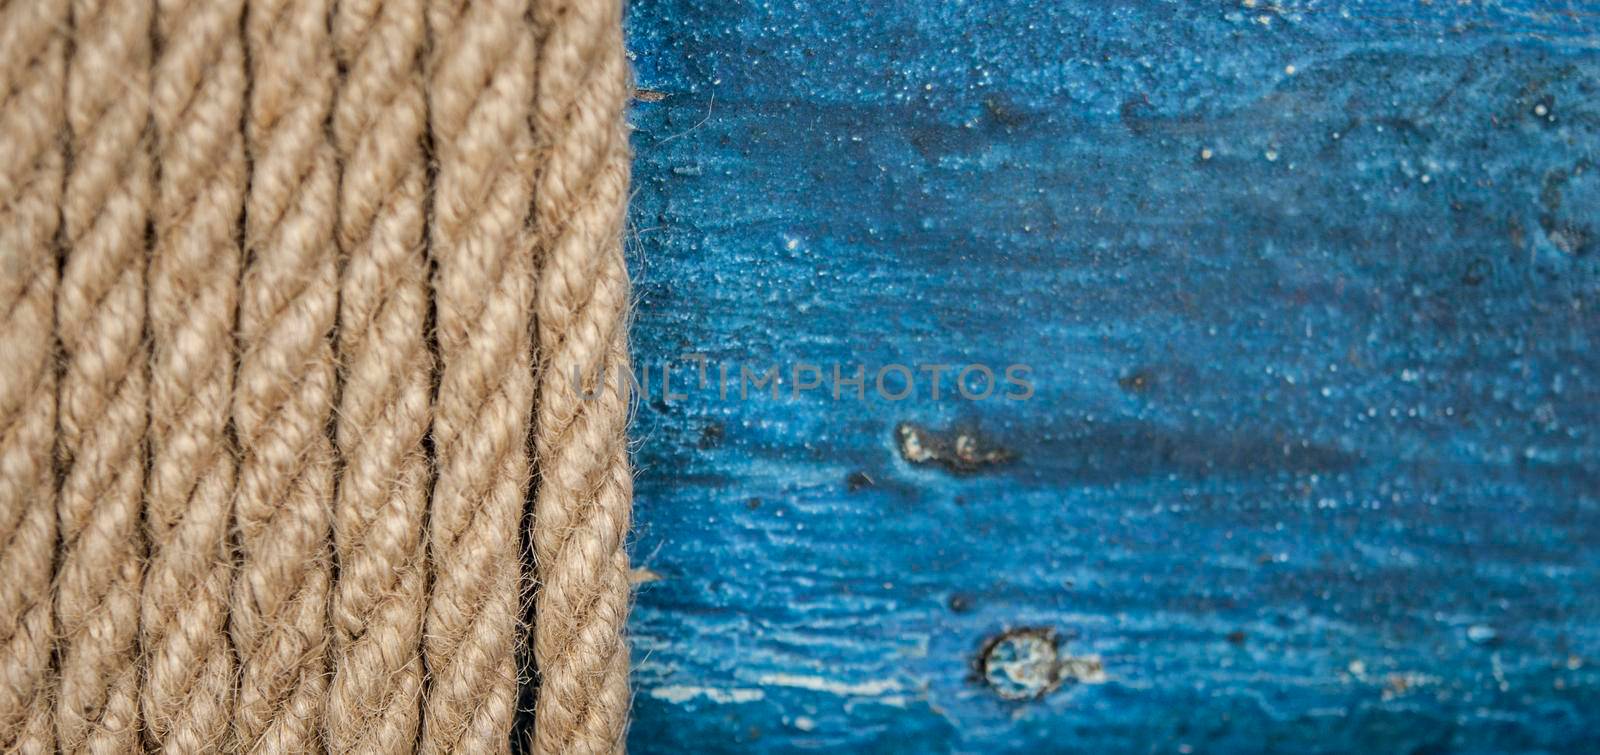 Vintage background with wooden log and hemp rope by inxti